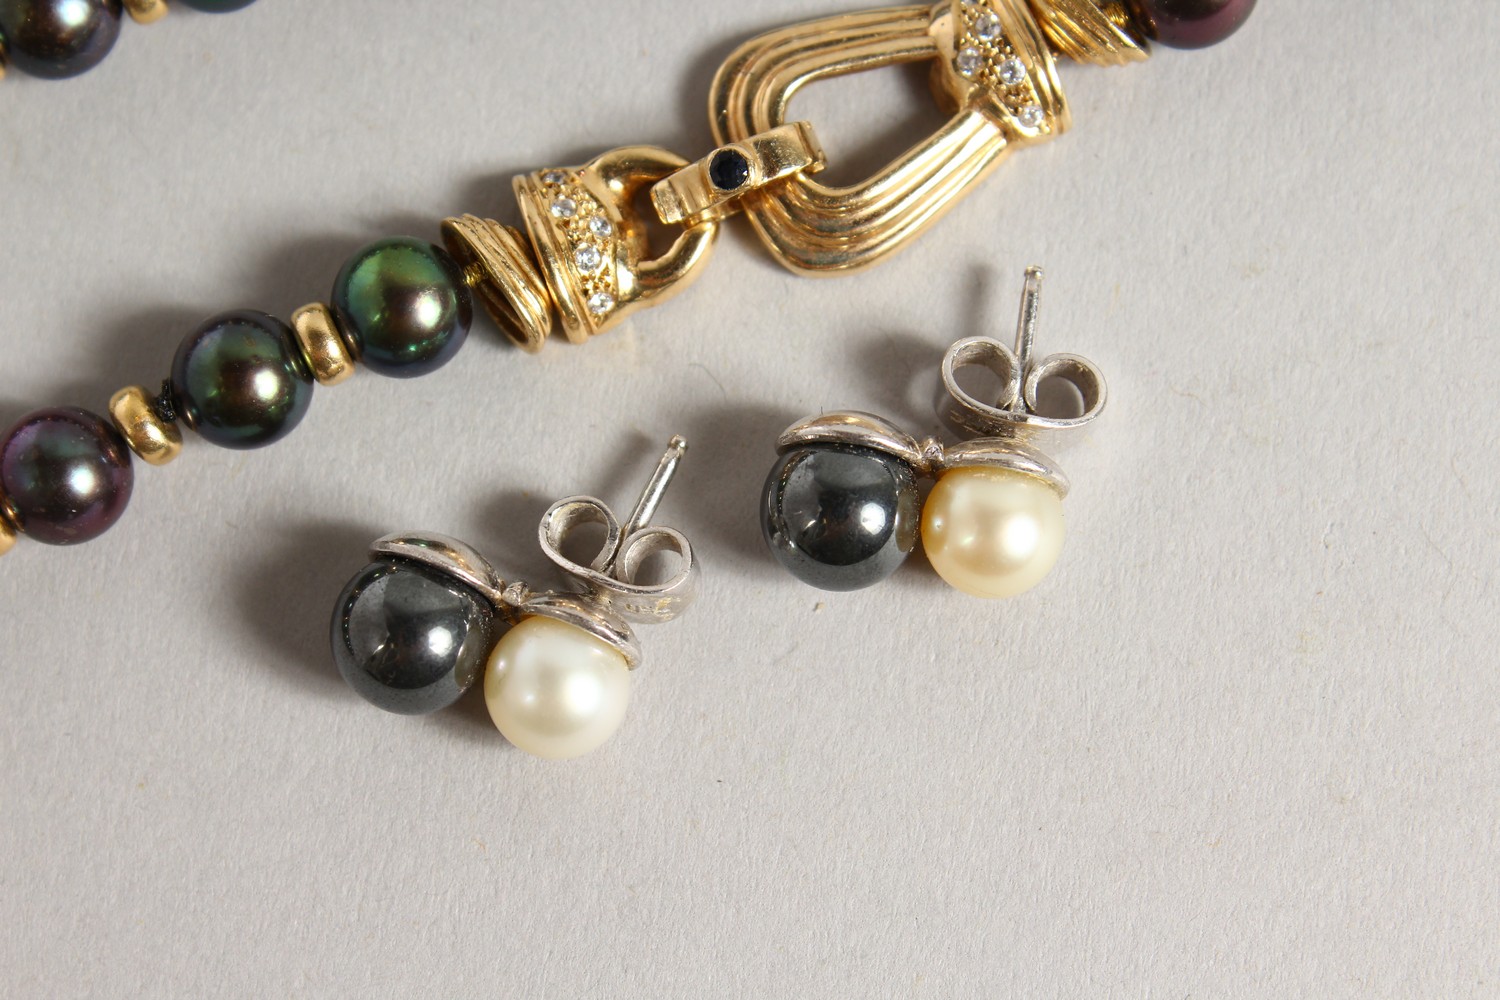 A GOOD BLACK PEARL NECKLACE, with ornate gold and diamond clasp, with a pair of similar earrings. - Image 2 of 5